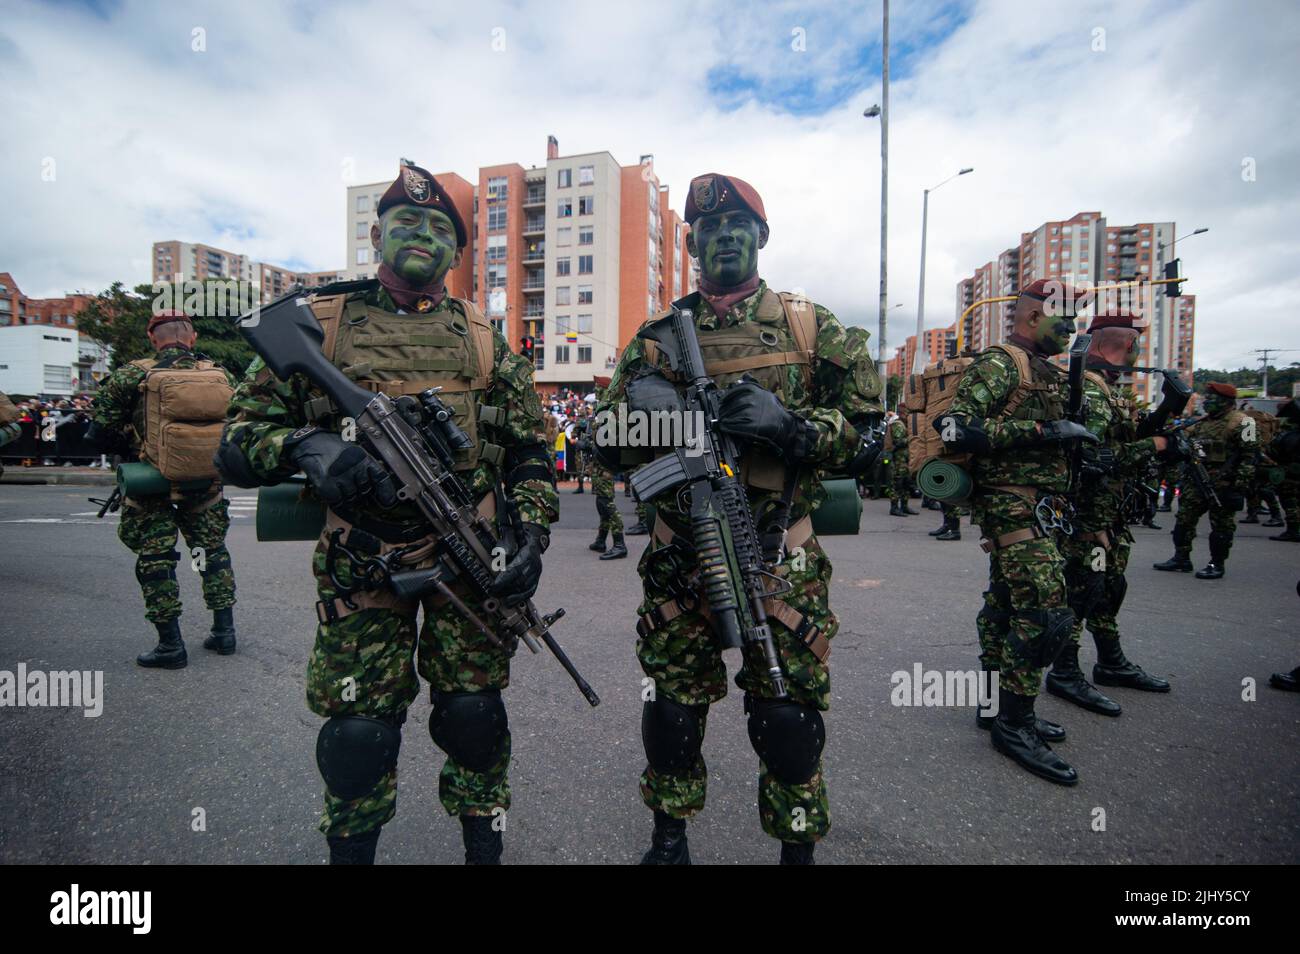 Colombian army special commandos pose for a photo during the 212 years of independence of Colombia military parade in Bogota, Colombia, July 20, 2022. Stock Photo